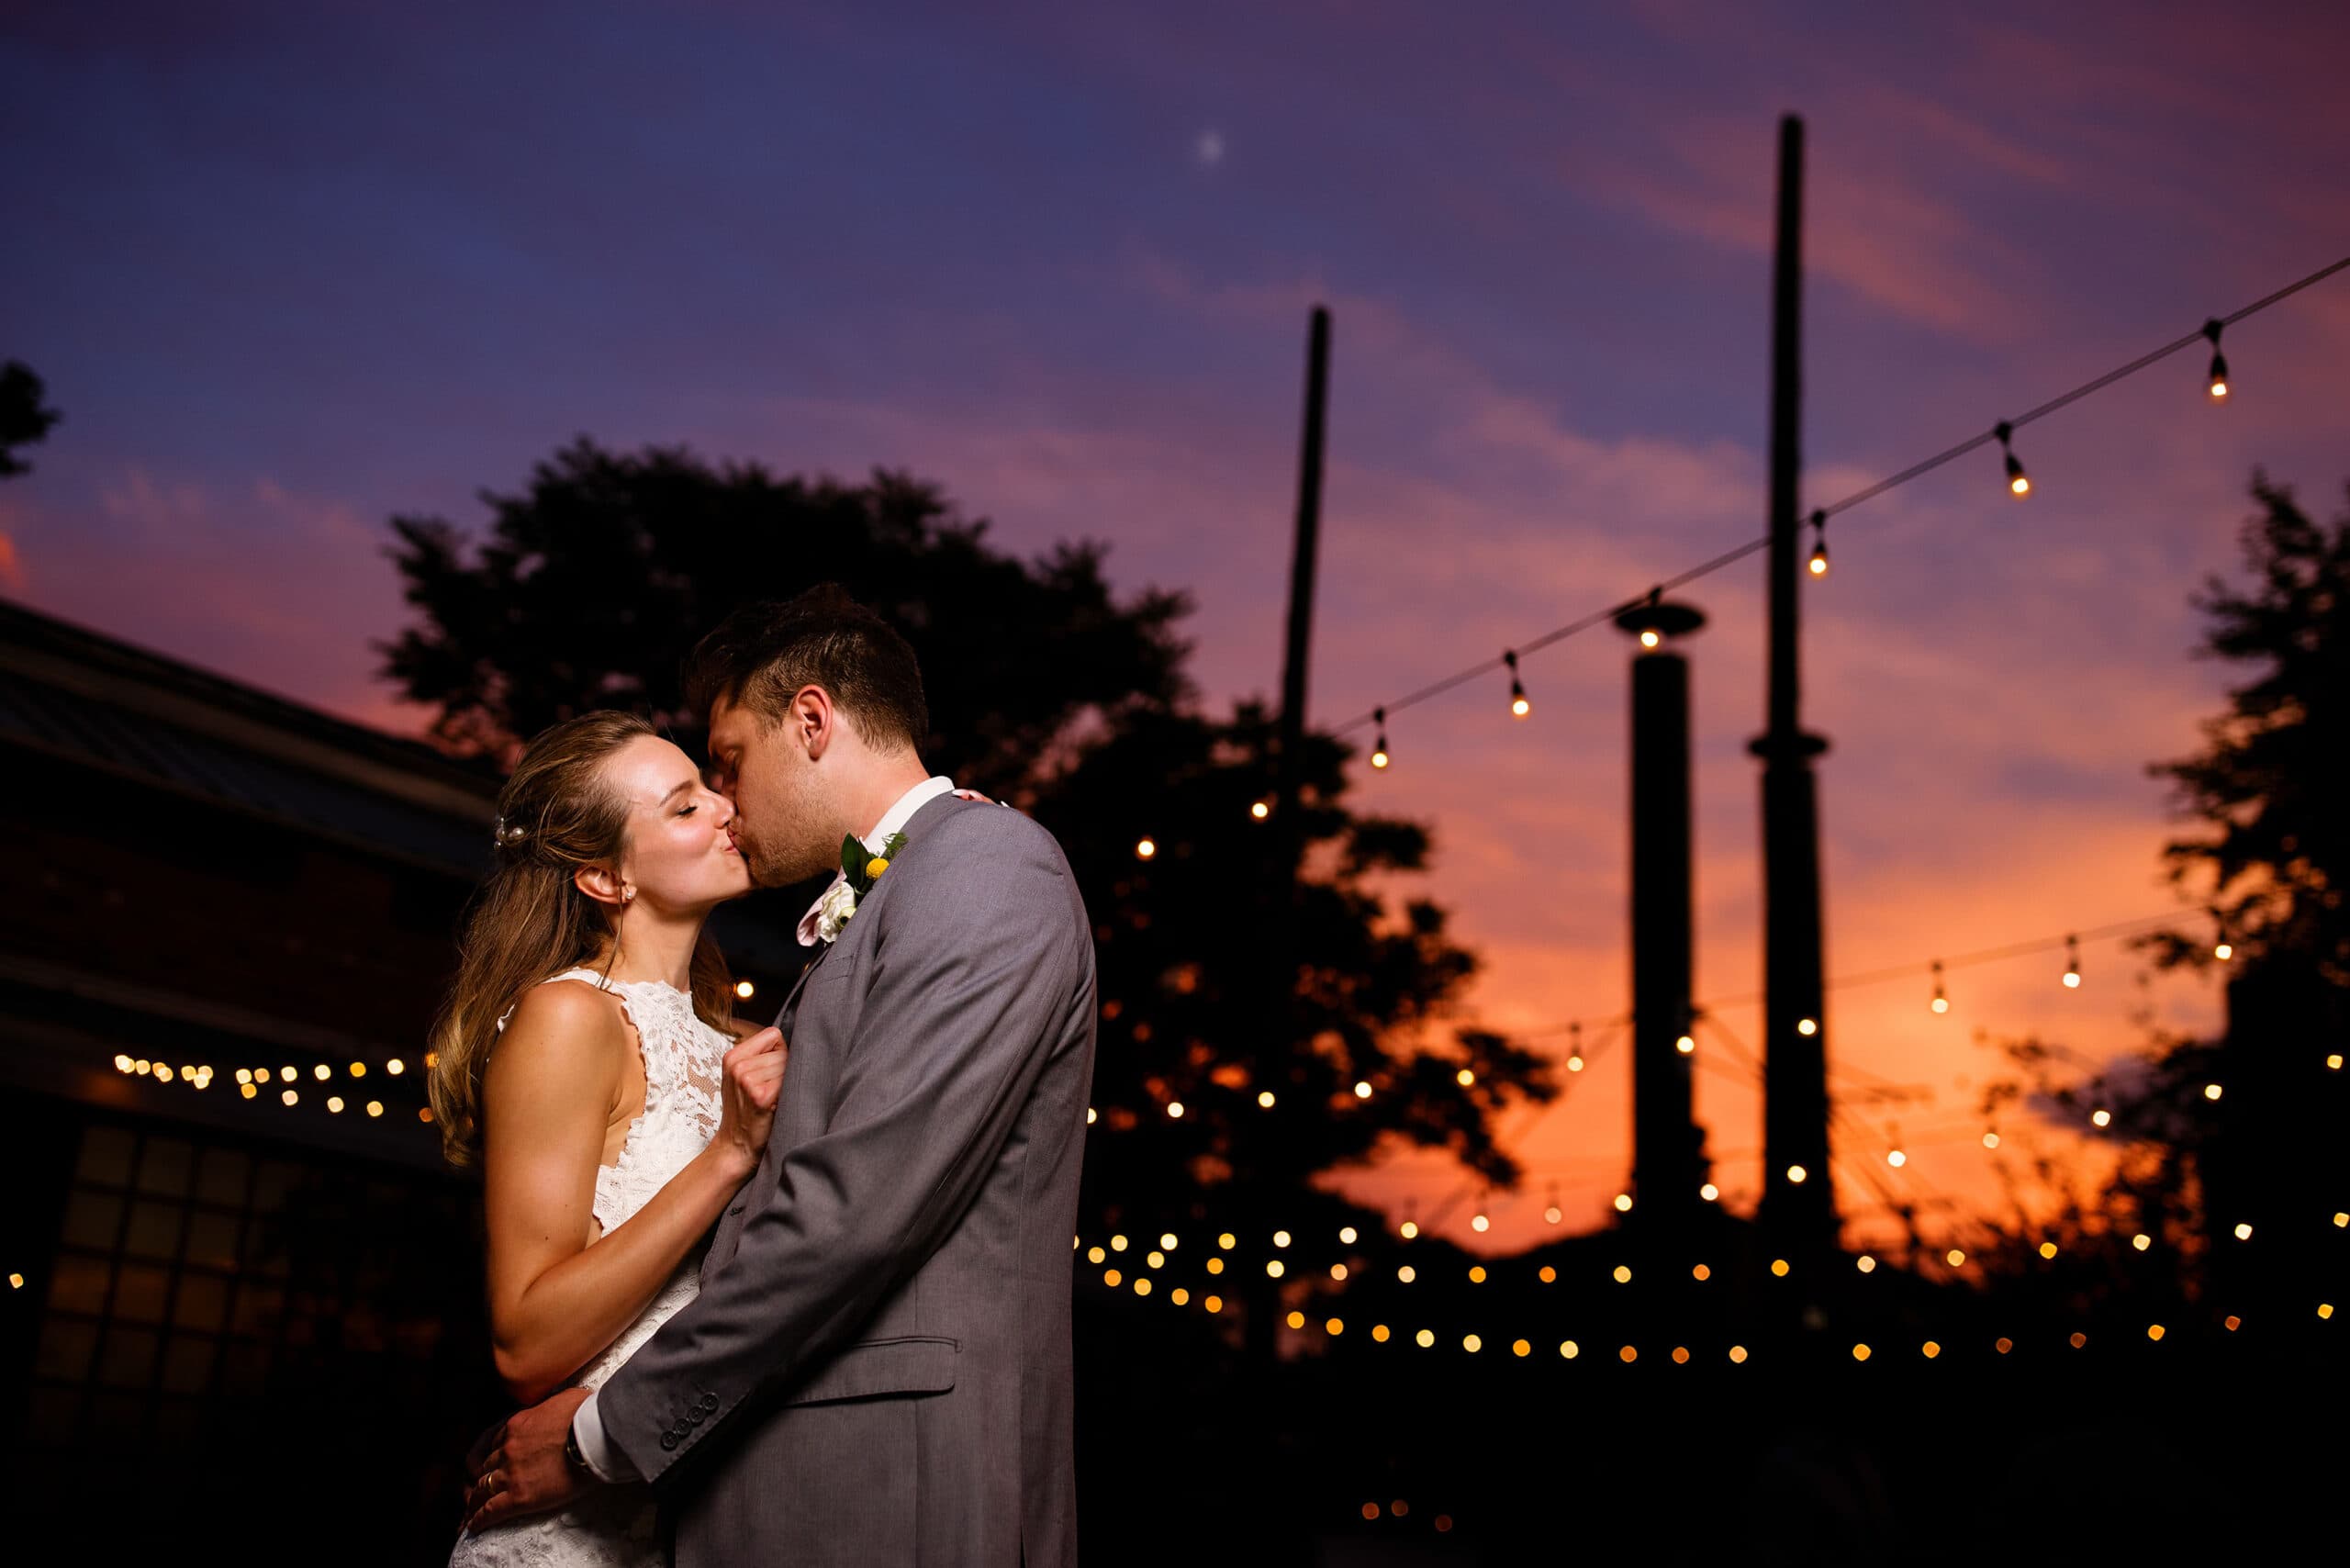 Newlyweds share a kiss at sunset under the market lights at Blanc on their wedding day in Denver